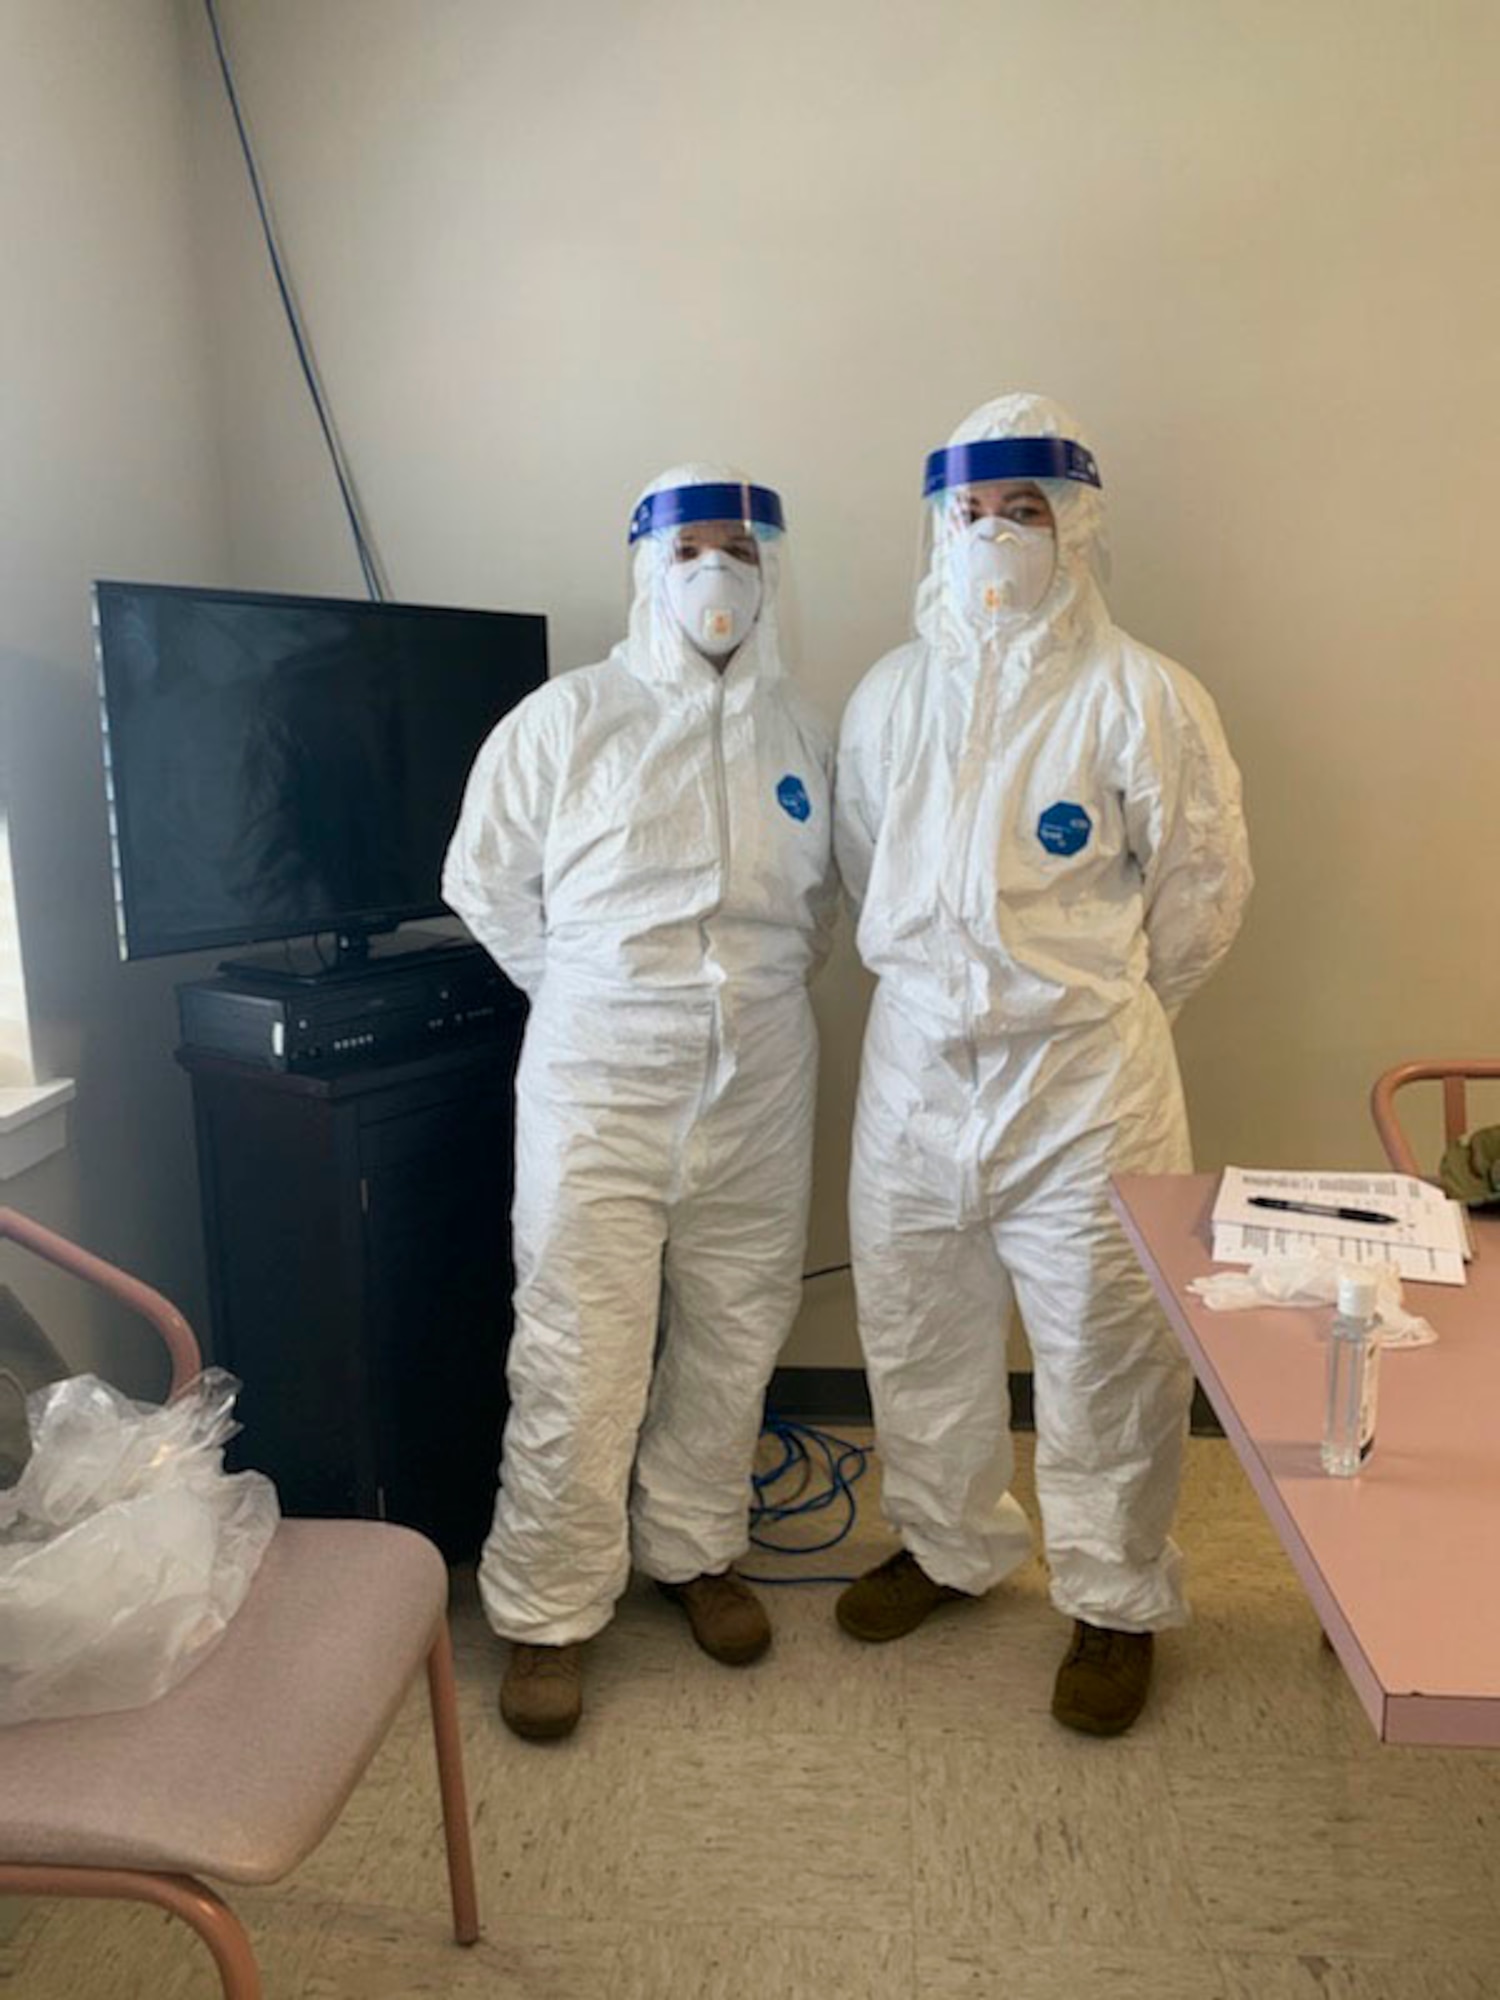 Members of the Connecticut Air National Guard conduct a safety inspection at a long-term care facility in Connecticut, May 2020. The inspections, which were part of Connecticut's COVID-19 pandemic response, were conducted by teams of Connecticut National Guardsmen and DPH surveyors. (U.S. Air Natitonal Guard photo by Tech Sgt. Tamara R. Dabney)